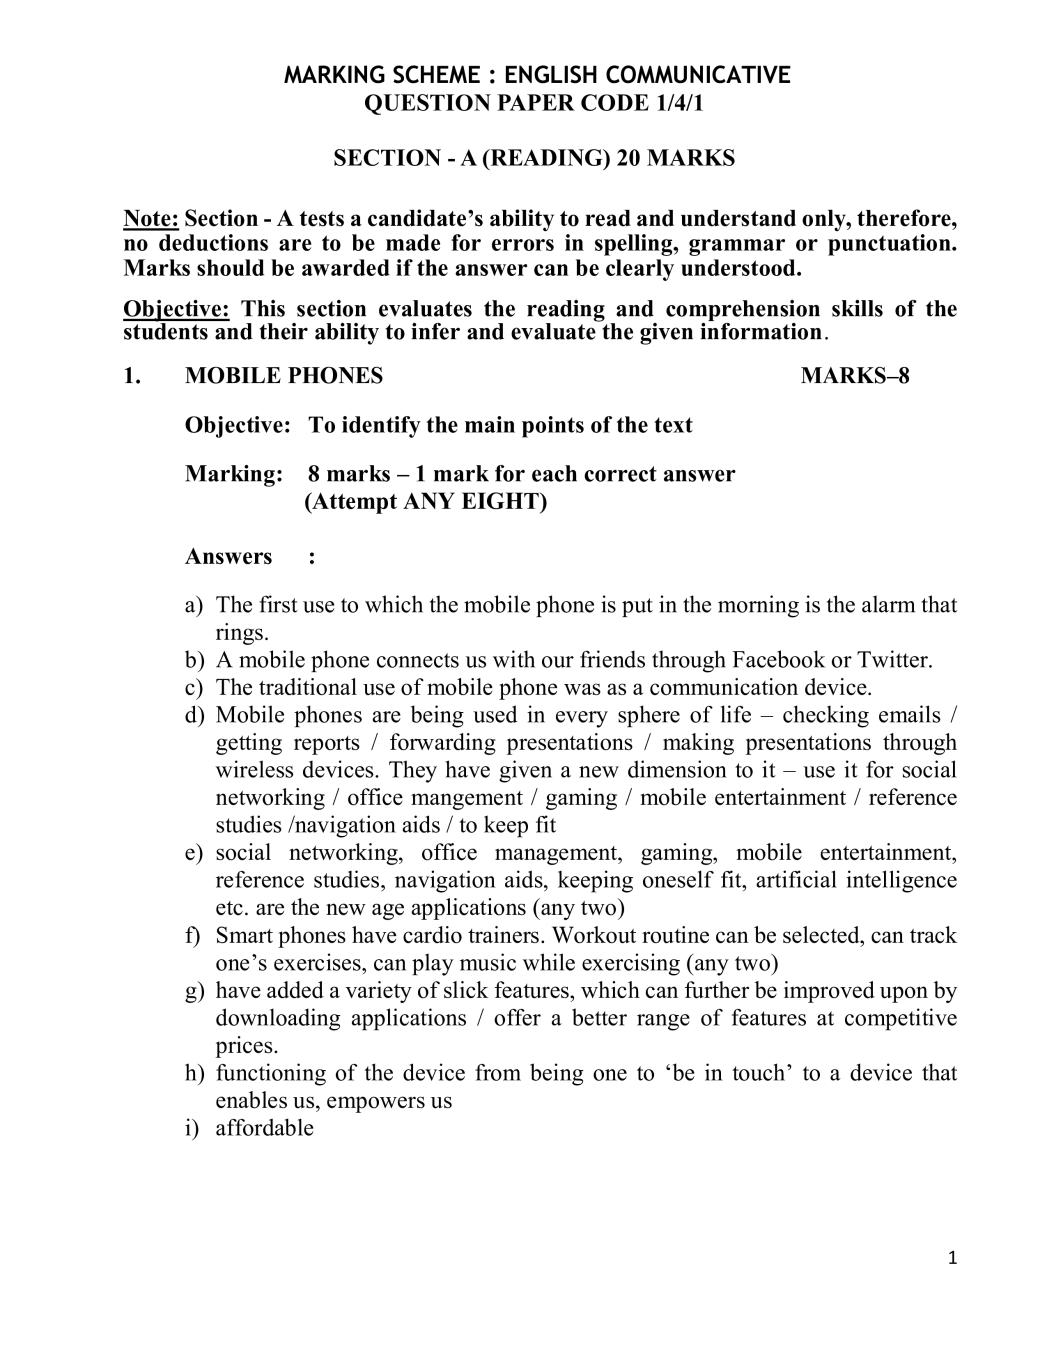 CBSE Class 10 English Communicative Question Paper 2019 Set 4 Solutions - Page 1